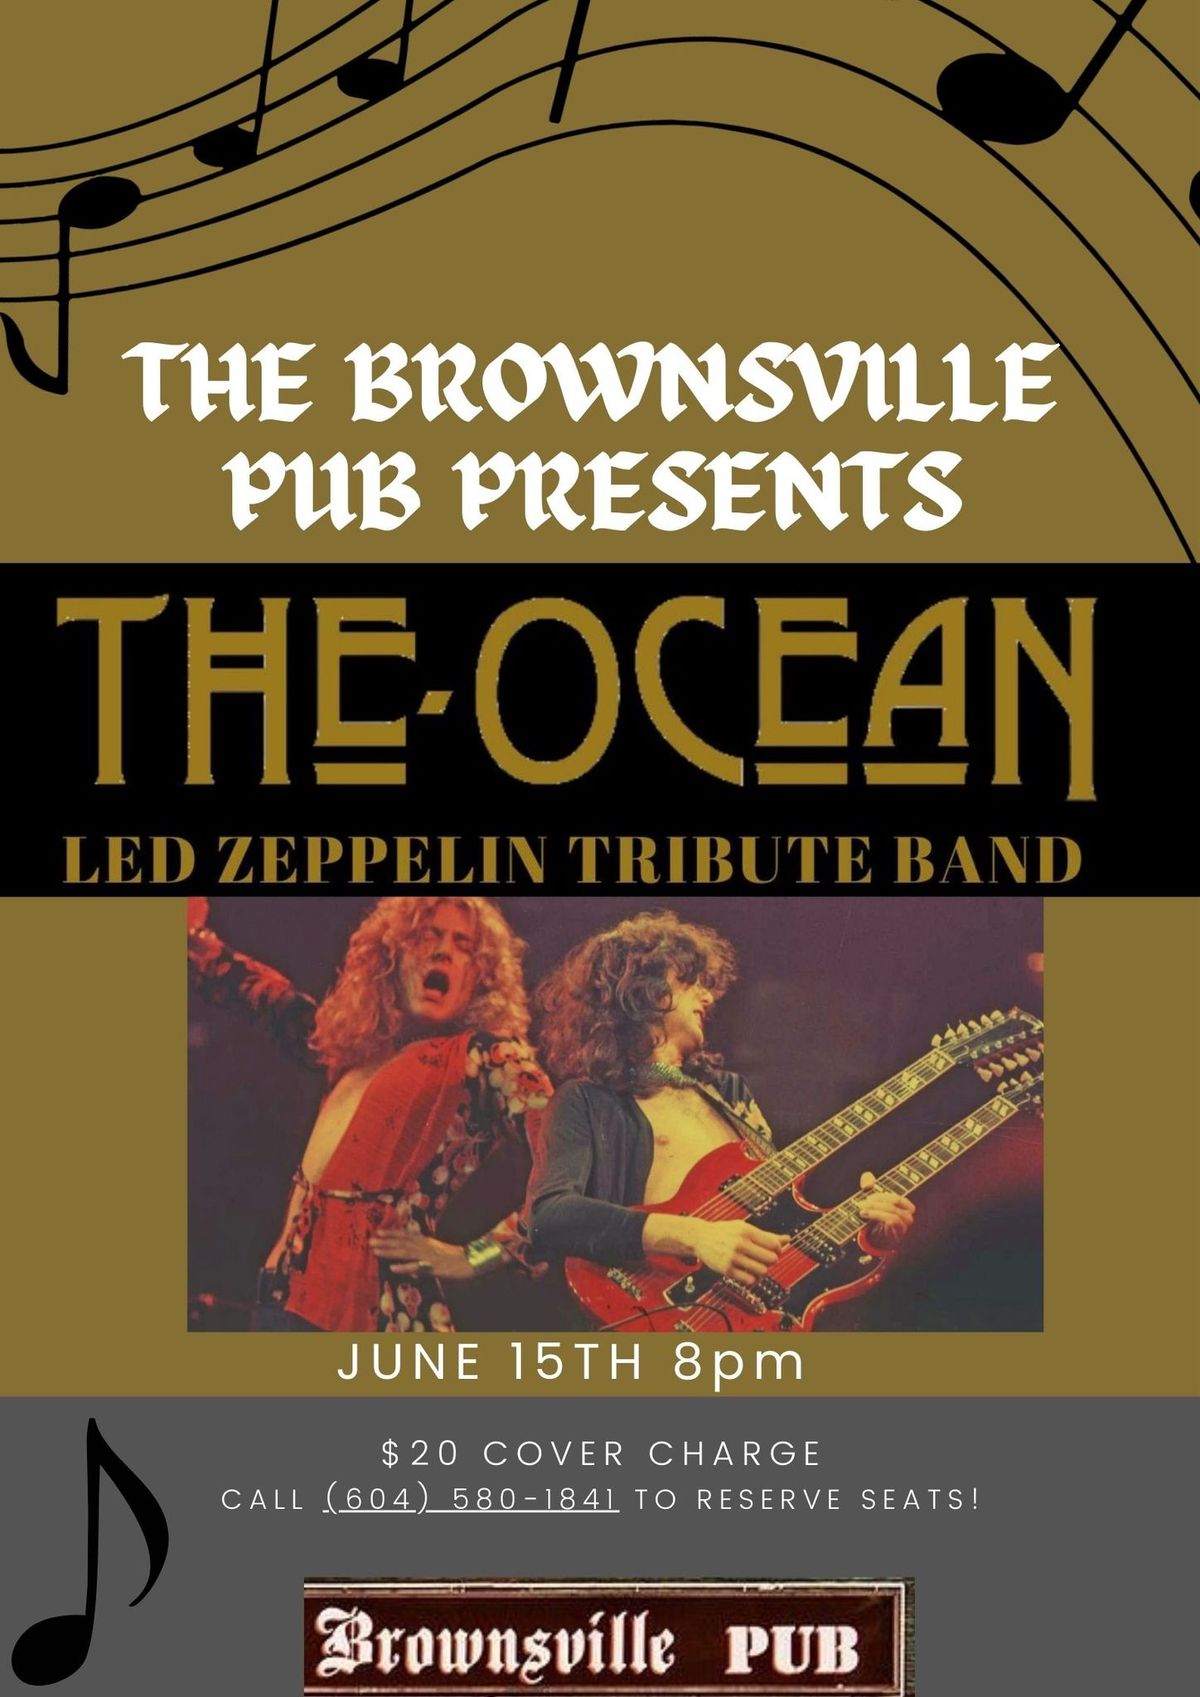 Brownsville Pub Presents: The Ocean Led Zeppelin Tribute Band